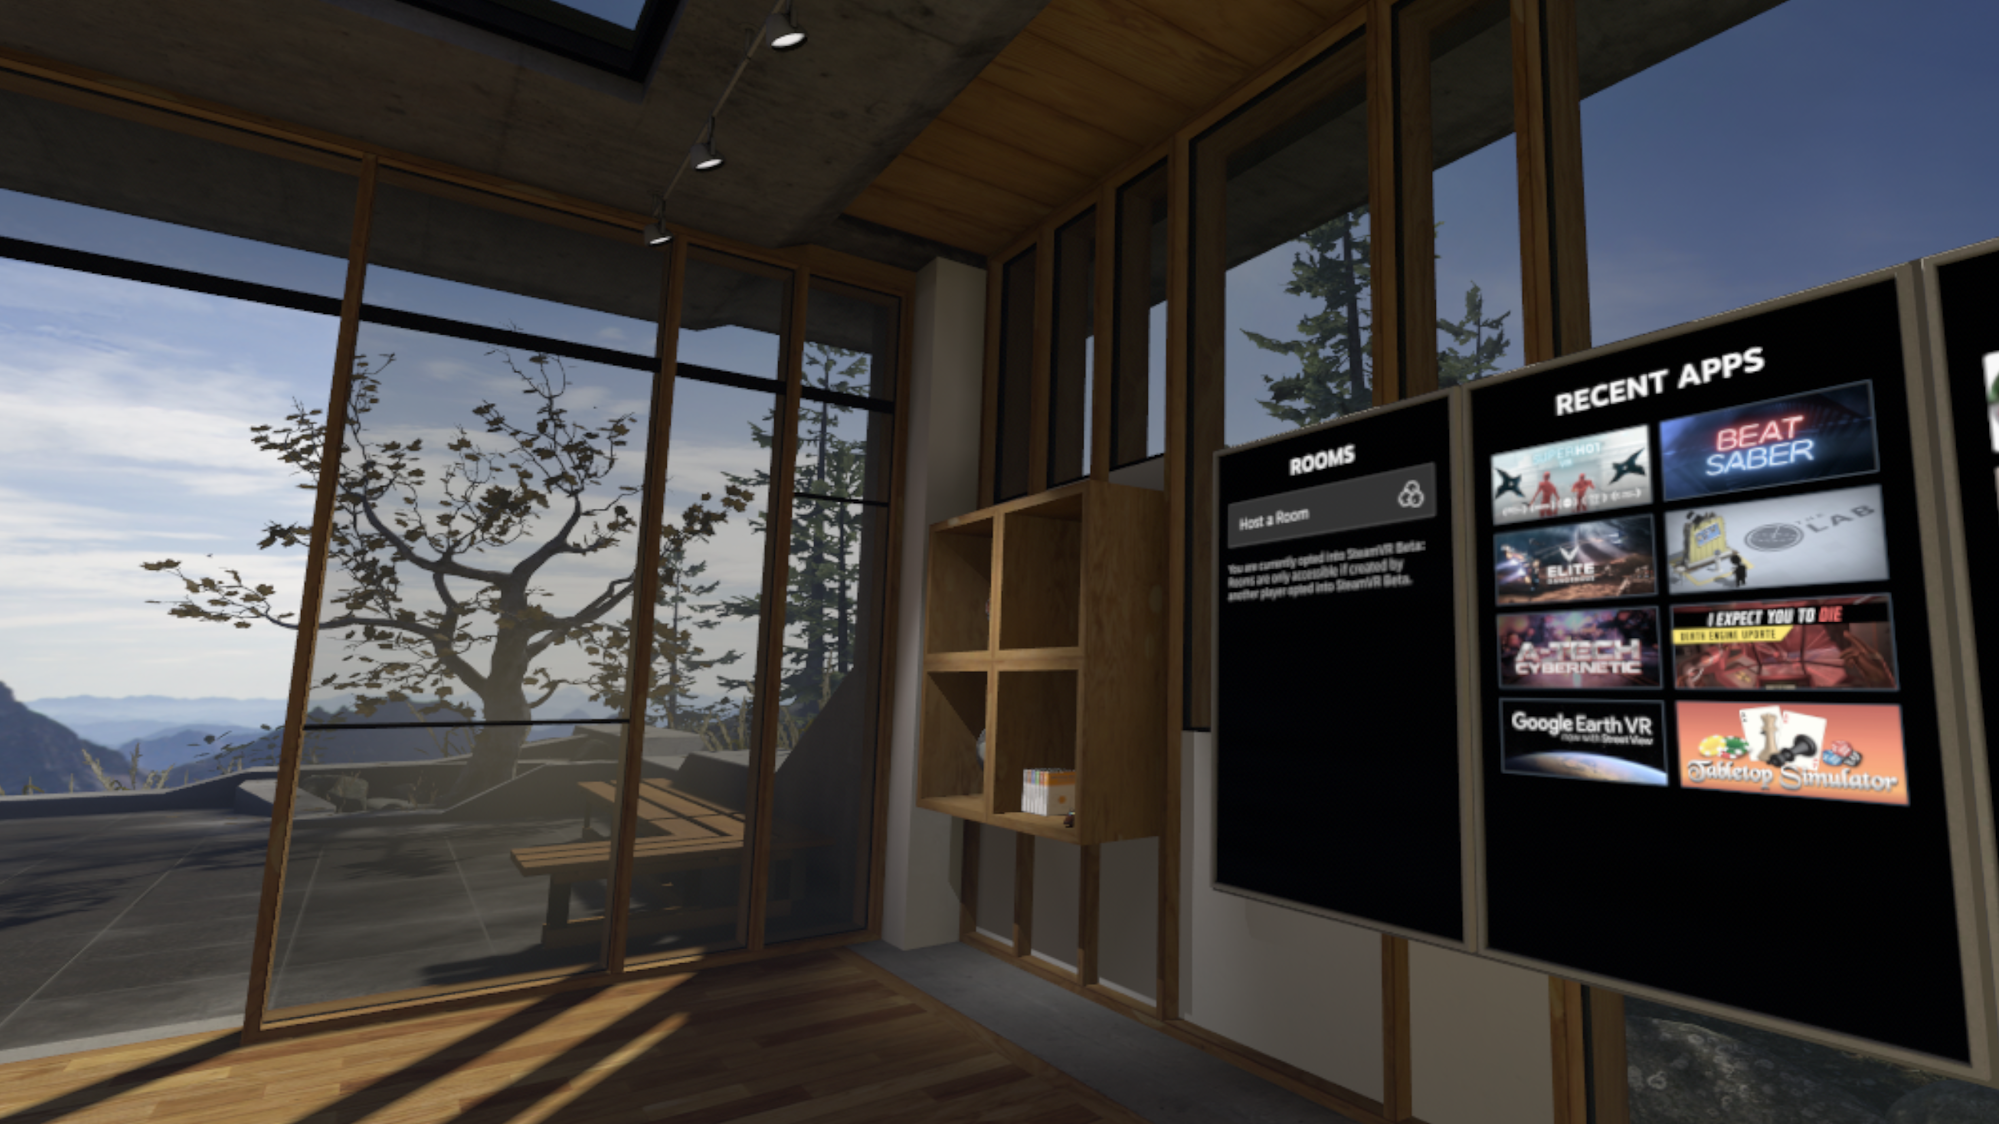 Inside your “home” you can set up displays of Steam (friends, games, etc.) and display some virtual goods.